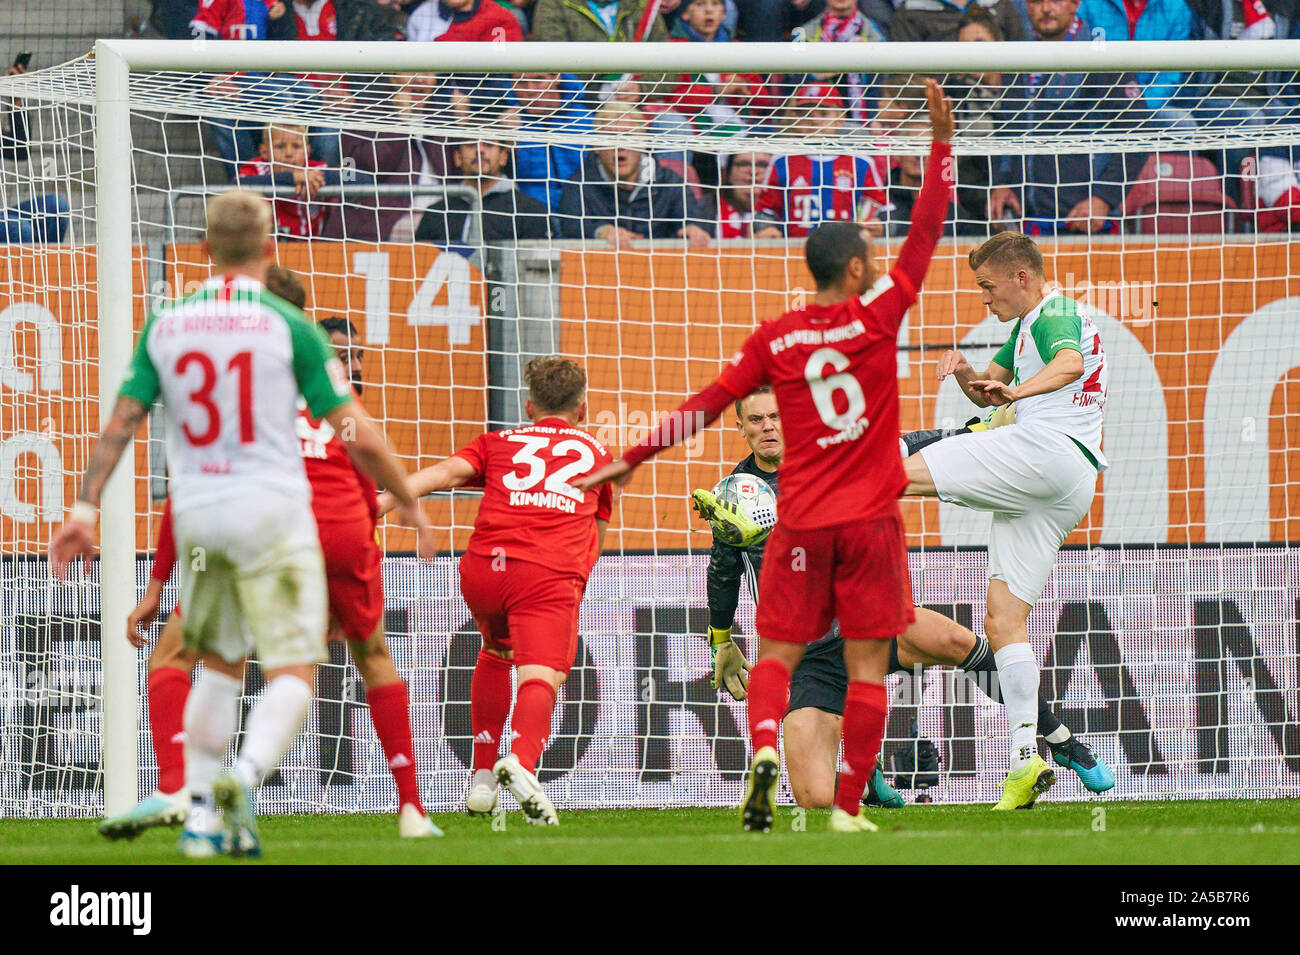 Football FC Augsburg - FC Bayern München, Augsburg October 19, 2019. Alfred FINNBOGASON, FCA 27 shoot on goal, pull off, shot, free kick,Manuel NEUER, FCB 1  FC AUGSBURG - FC BAYERN MUNICH  - DFL REGULATIONS PROHIBIT ANY USE OF PHOTOGRAPHS as IMAGE SEQUENCES and/or QUASI-VIDEO -  1.German Soccer League , Augsburg, October 19, 2019  Season 2019/2020, matchday 08, FCA, FCB,  © Peter Schatz / Alamy Live News Stock Photo